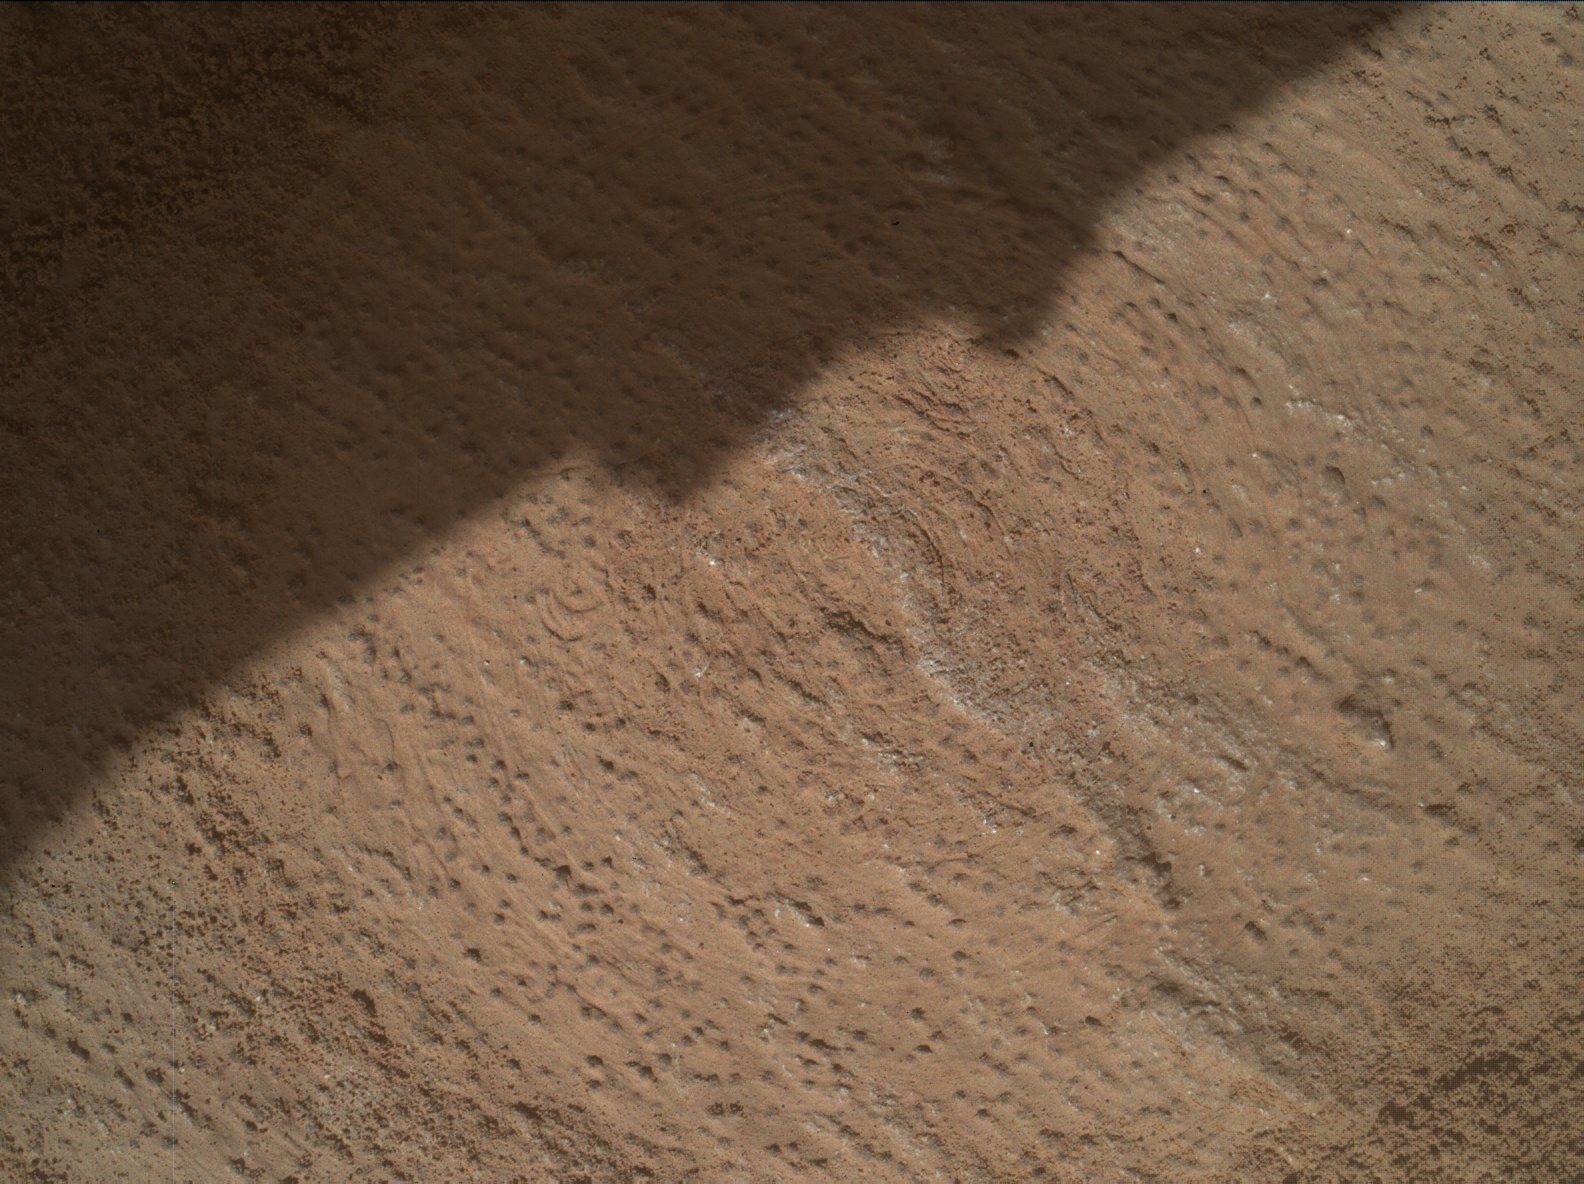 Nasa's Mars rover Curiosity acquired this image using its Mars Hand Lens Imager (MAHLI) on Sol 3287